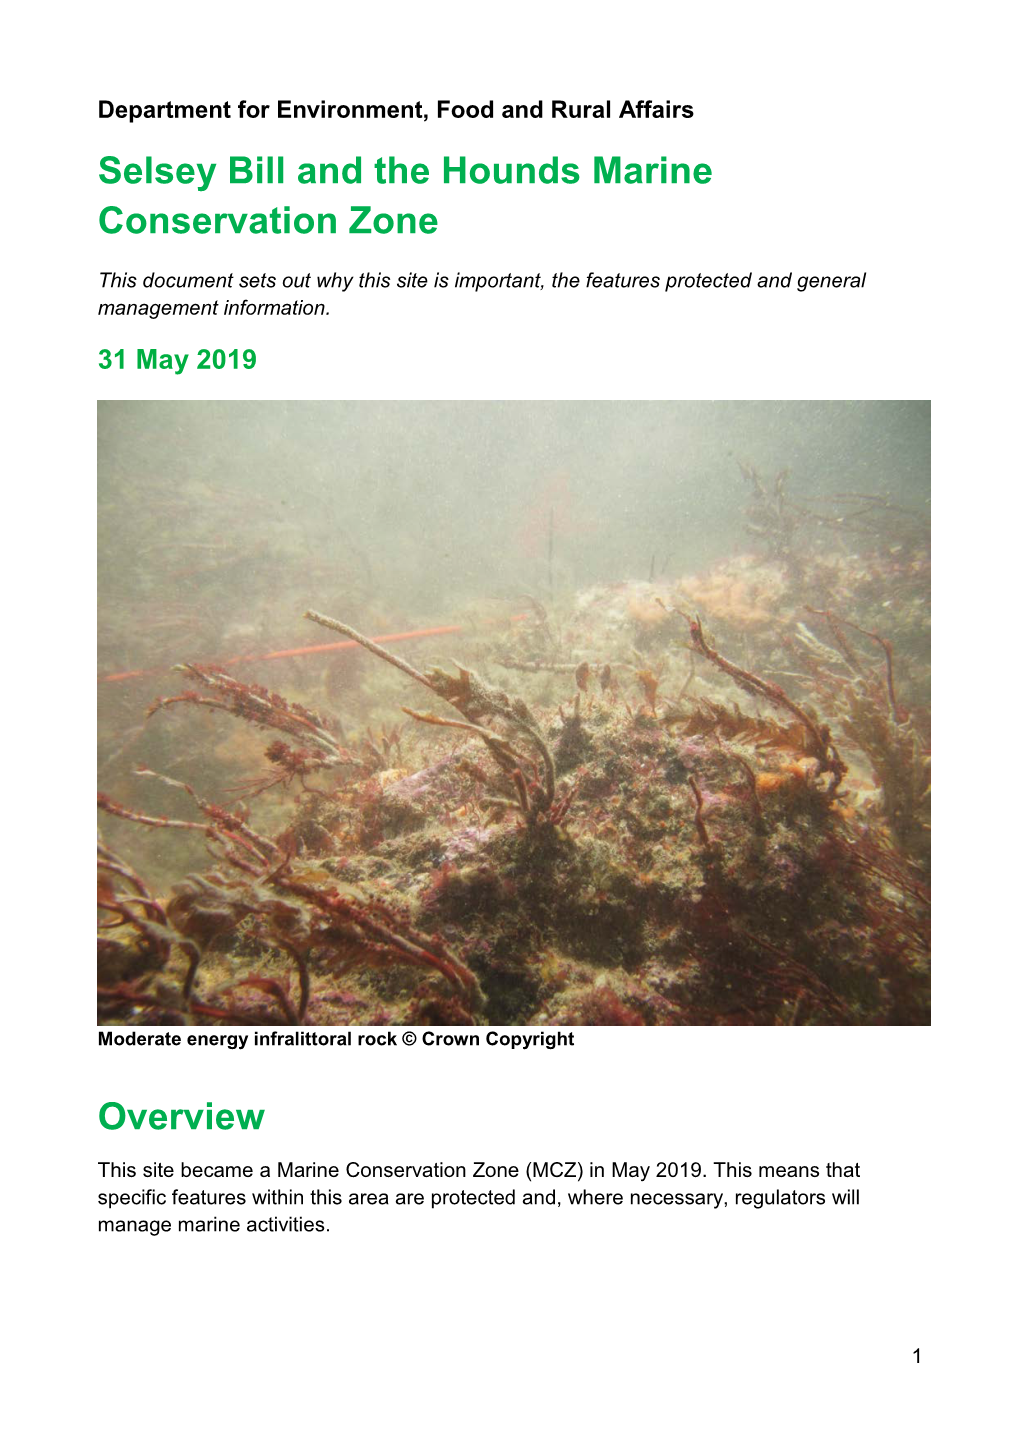 Selsey Bill and the Hounds Marine Conservation Zone Factsheet